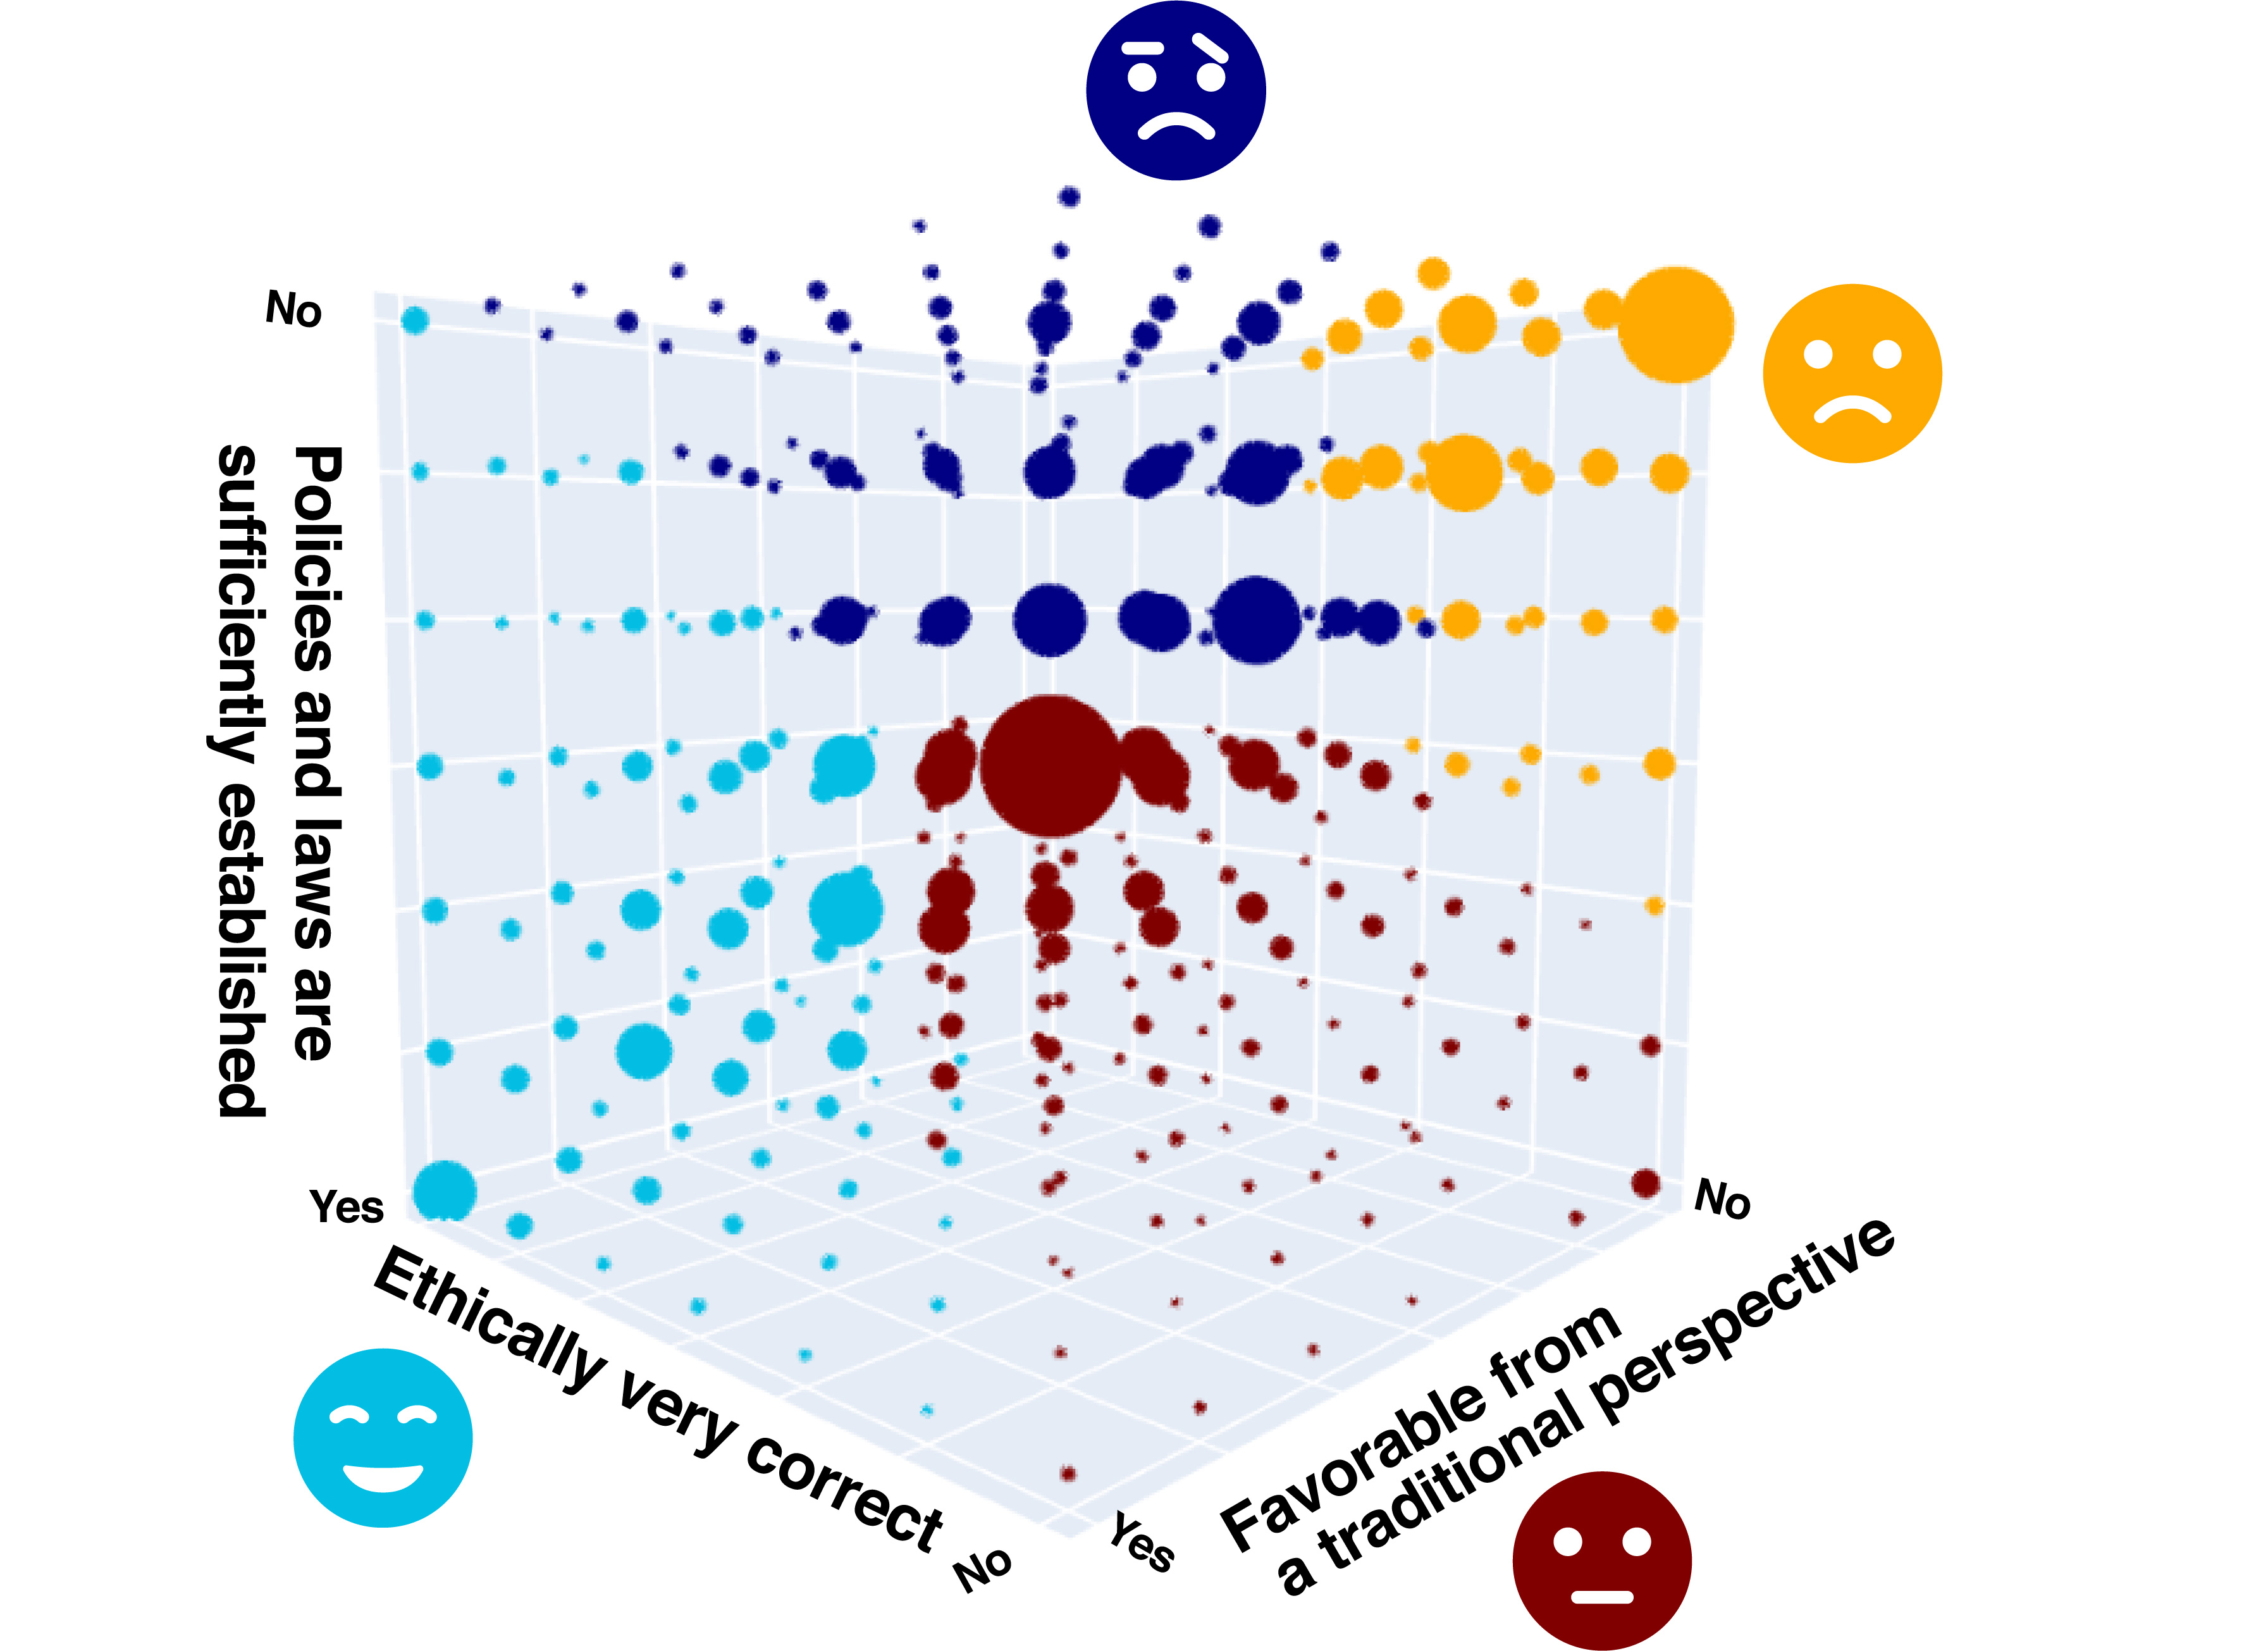 Researchers develop a new way to see how people feel about Artificial Intelligence